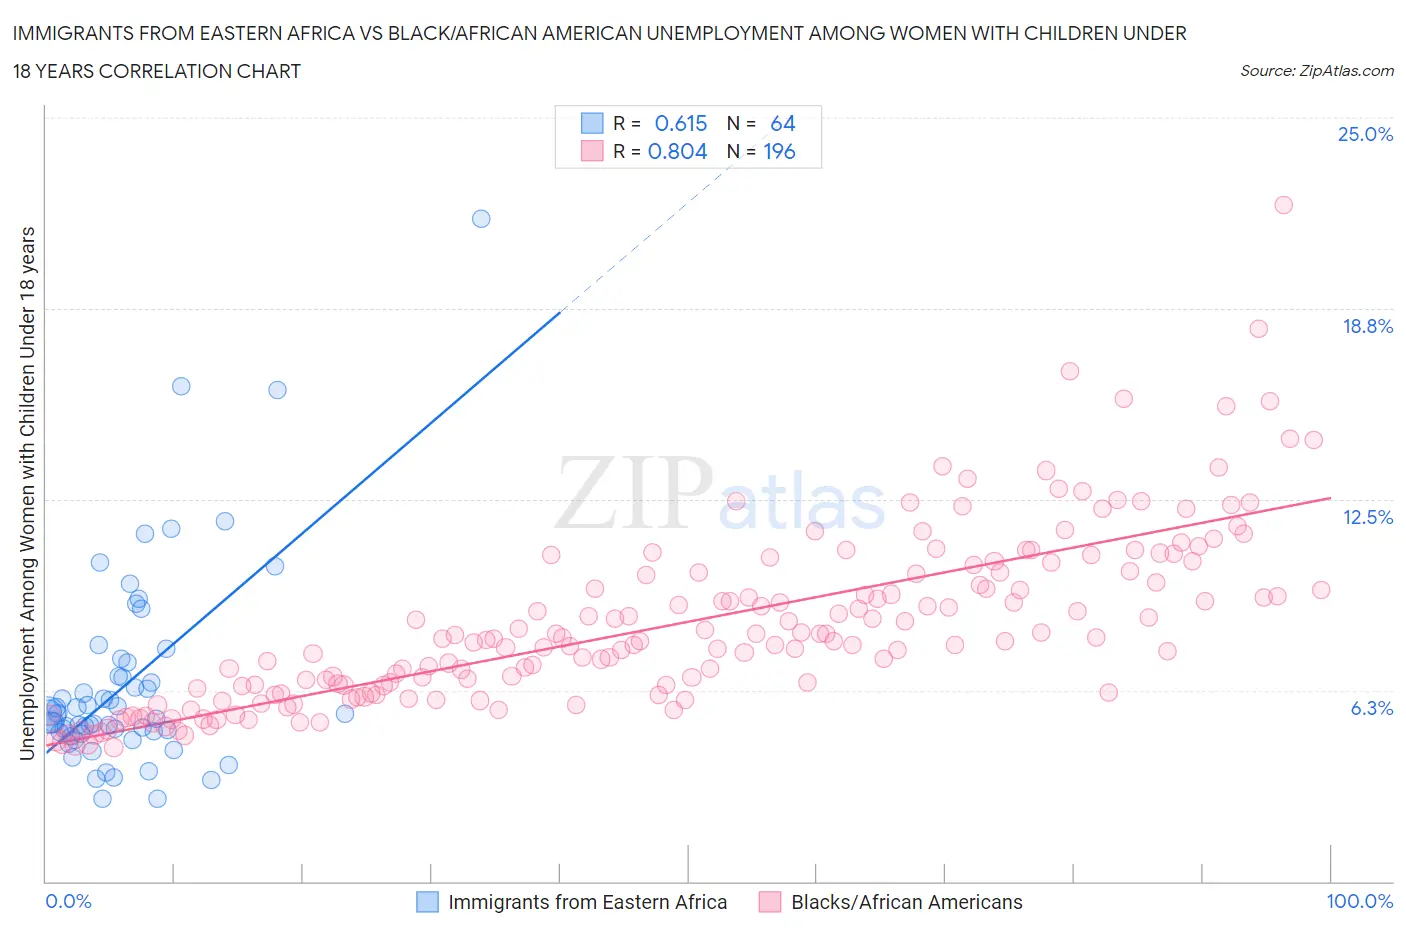 Immigrants from Eastern Africa vs Black/African American Unemployment Among Women with Children Under 18 years